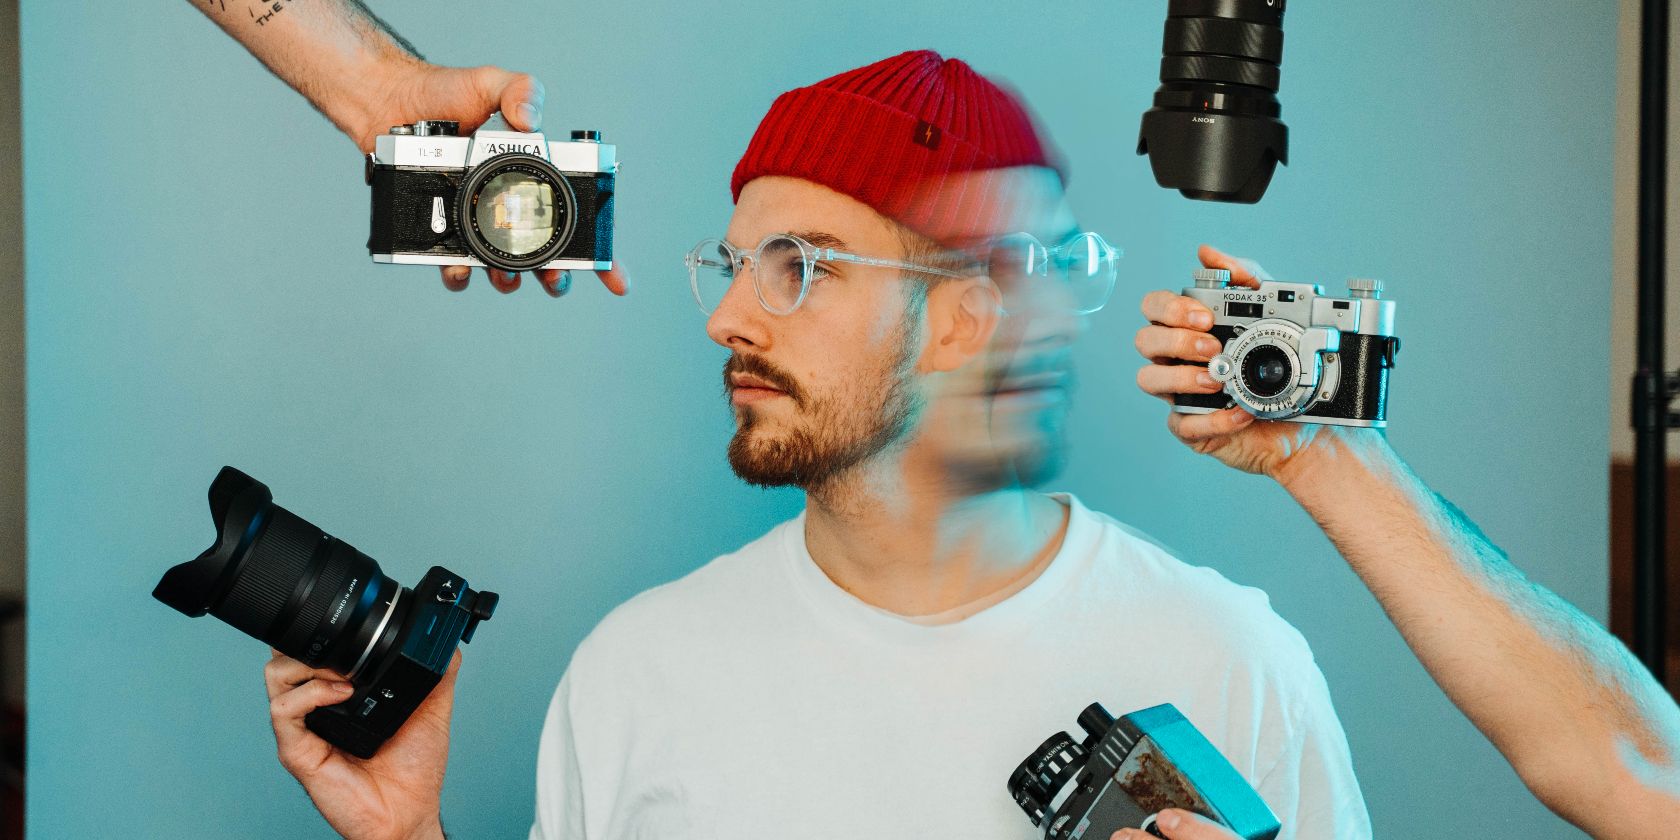 The 9 Best Websites for Buying Second-Hand Photography Gear